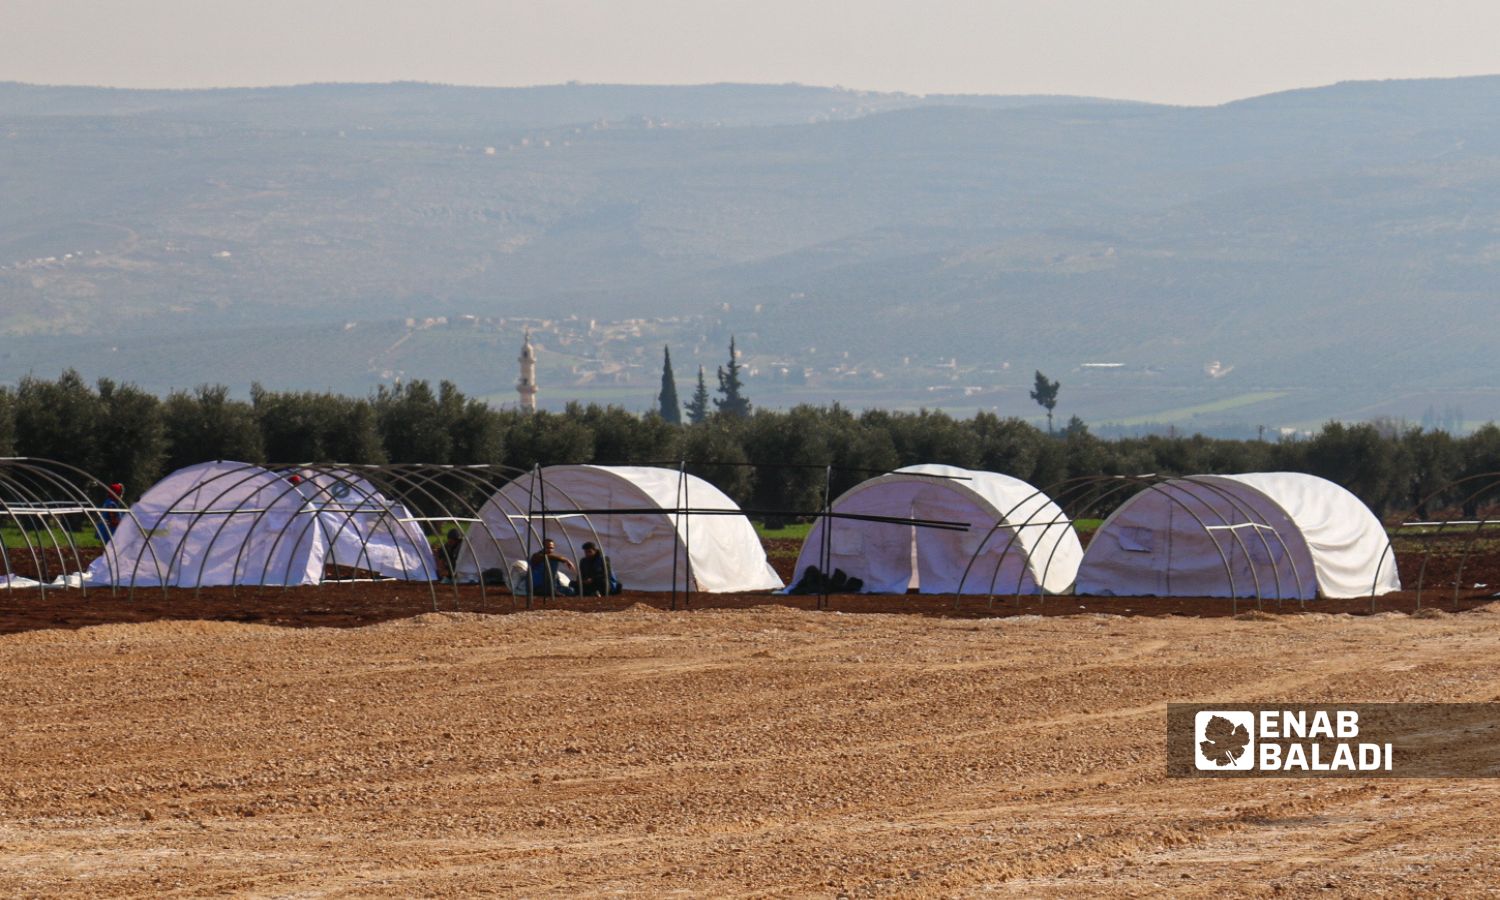 Tents for people in the town of Jindires in the northern countryside of Aleppo, affected by the Feb.6 earthquake that struck southern Turkey and separate areas in Syria - February 13, 2023 (Enab Baladi/Dayan Junpaz)